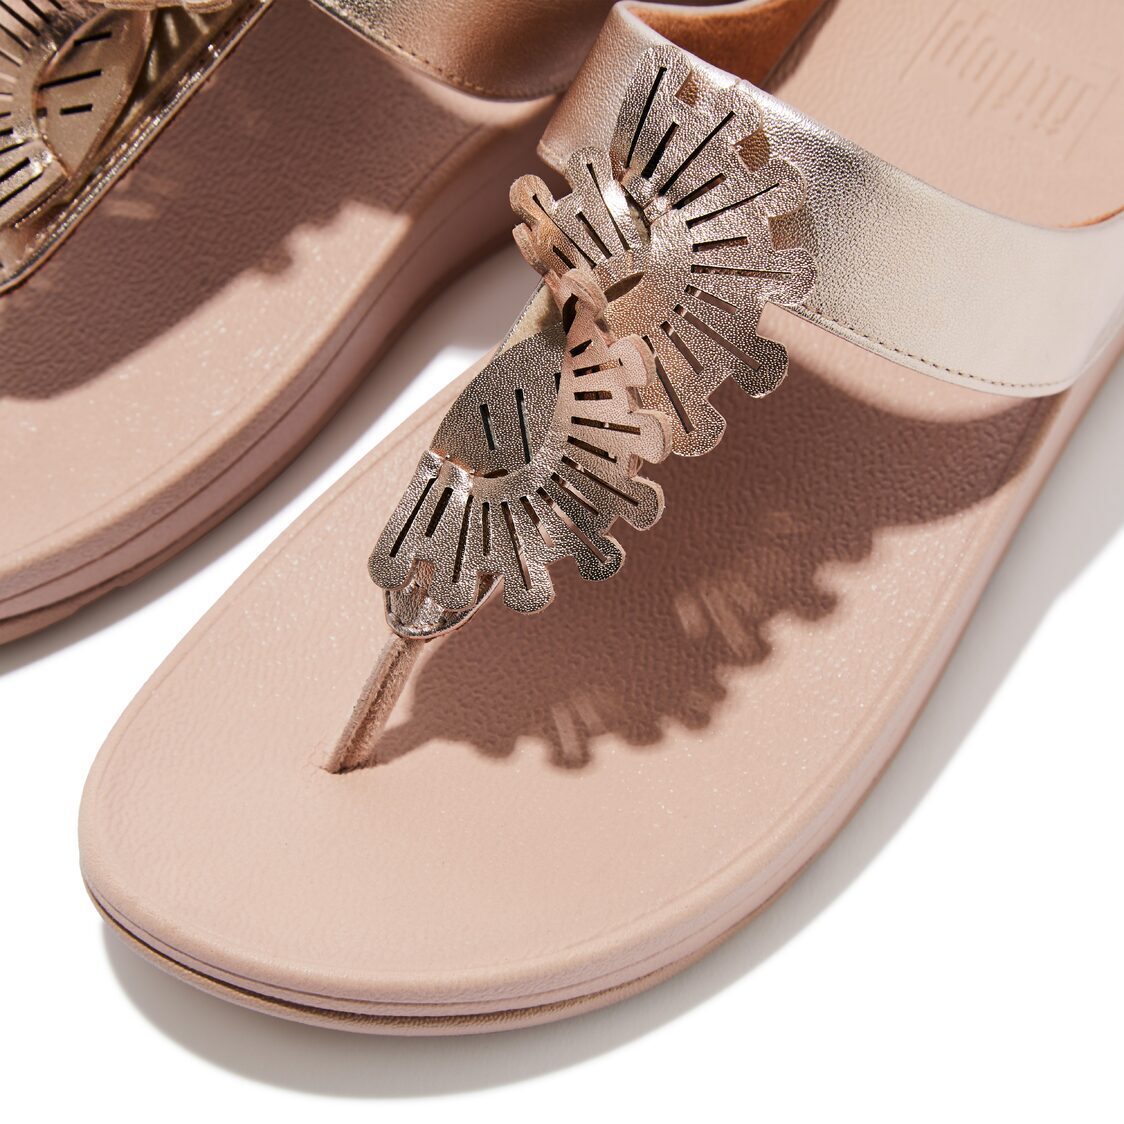 FitFlop 'Arena™' Sandal | Nordstrom | Fitflop shoes, Fashion shoes, Fitflop  sandals